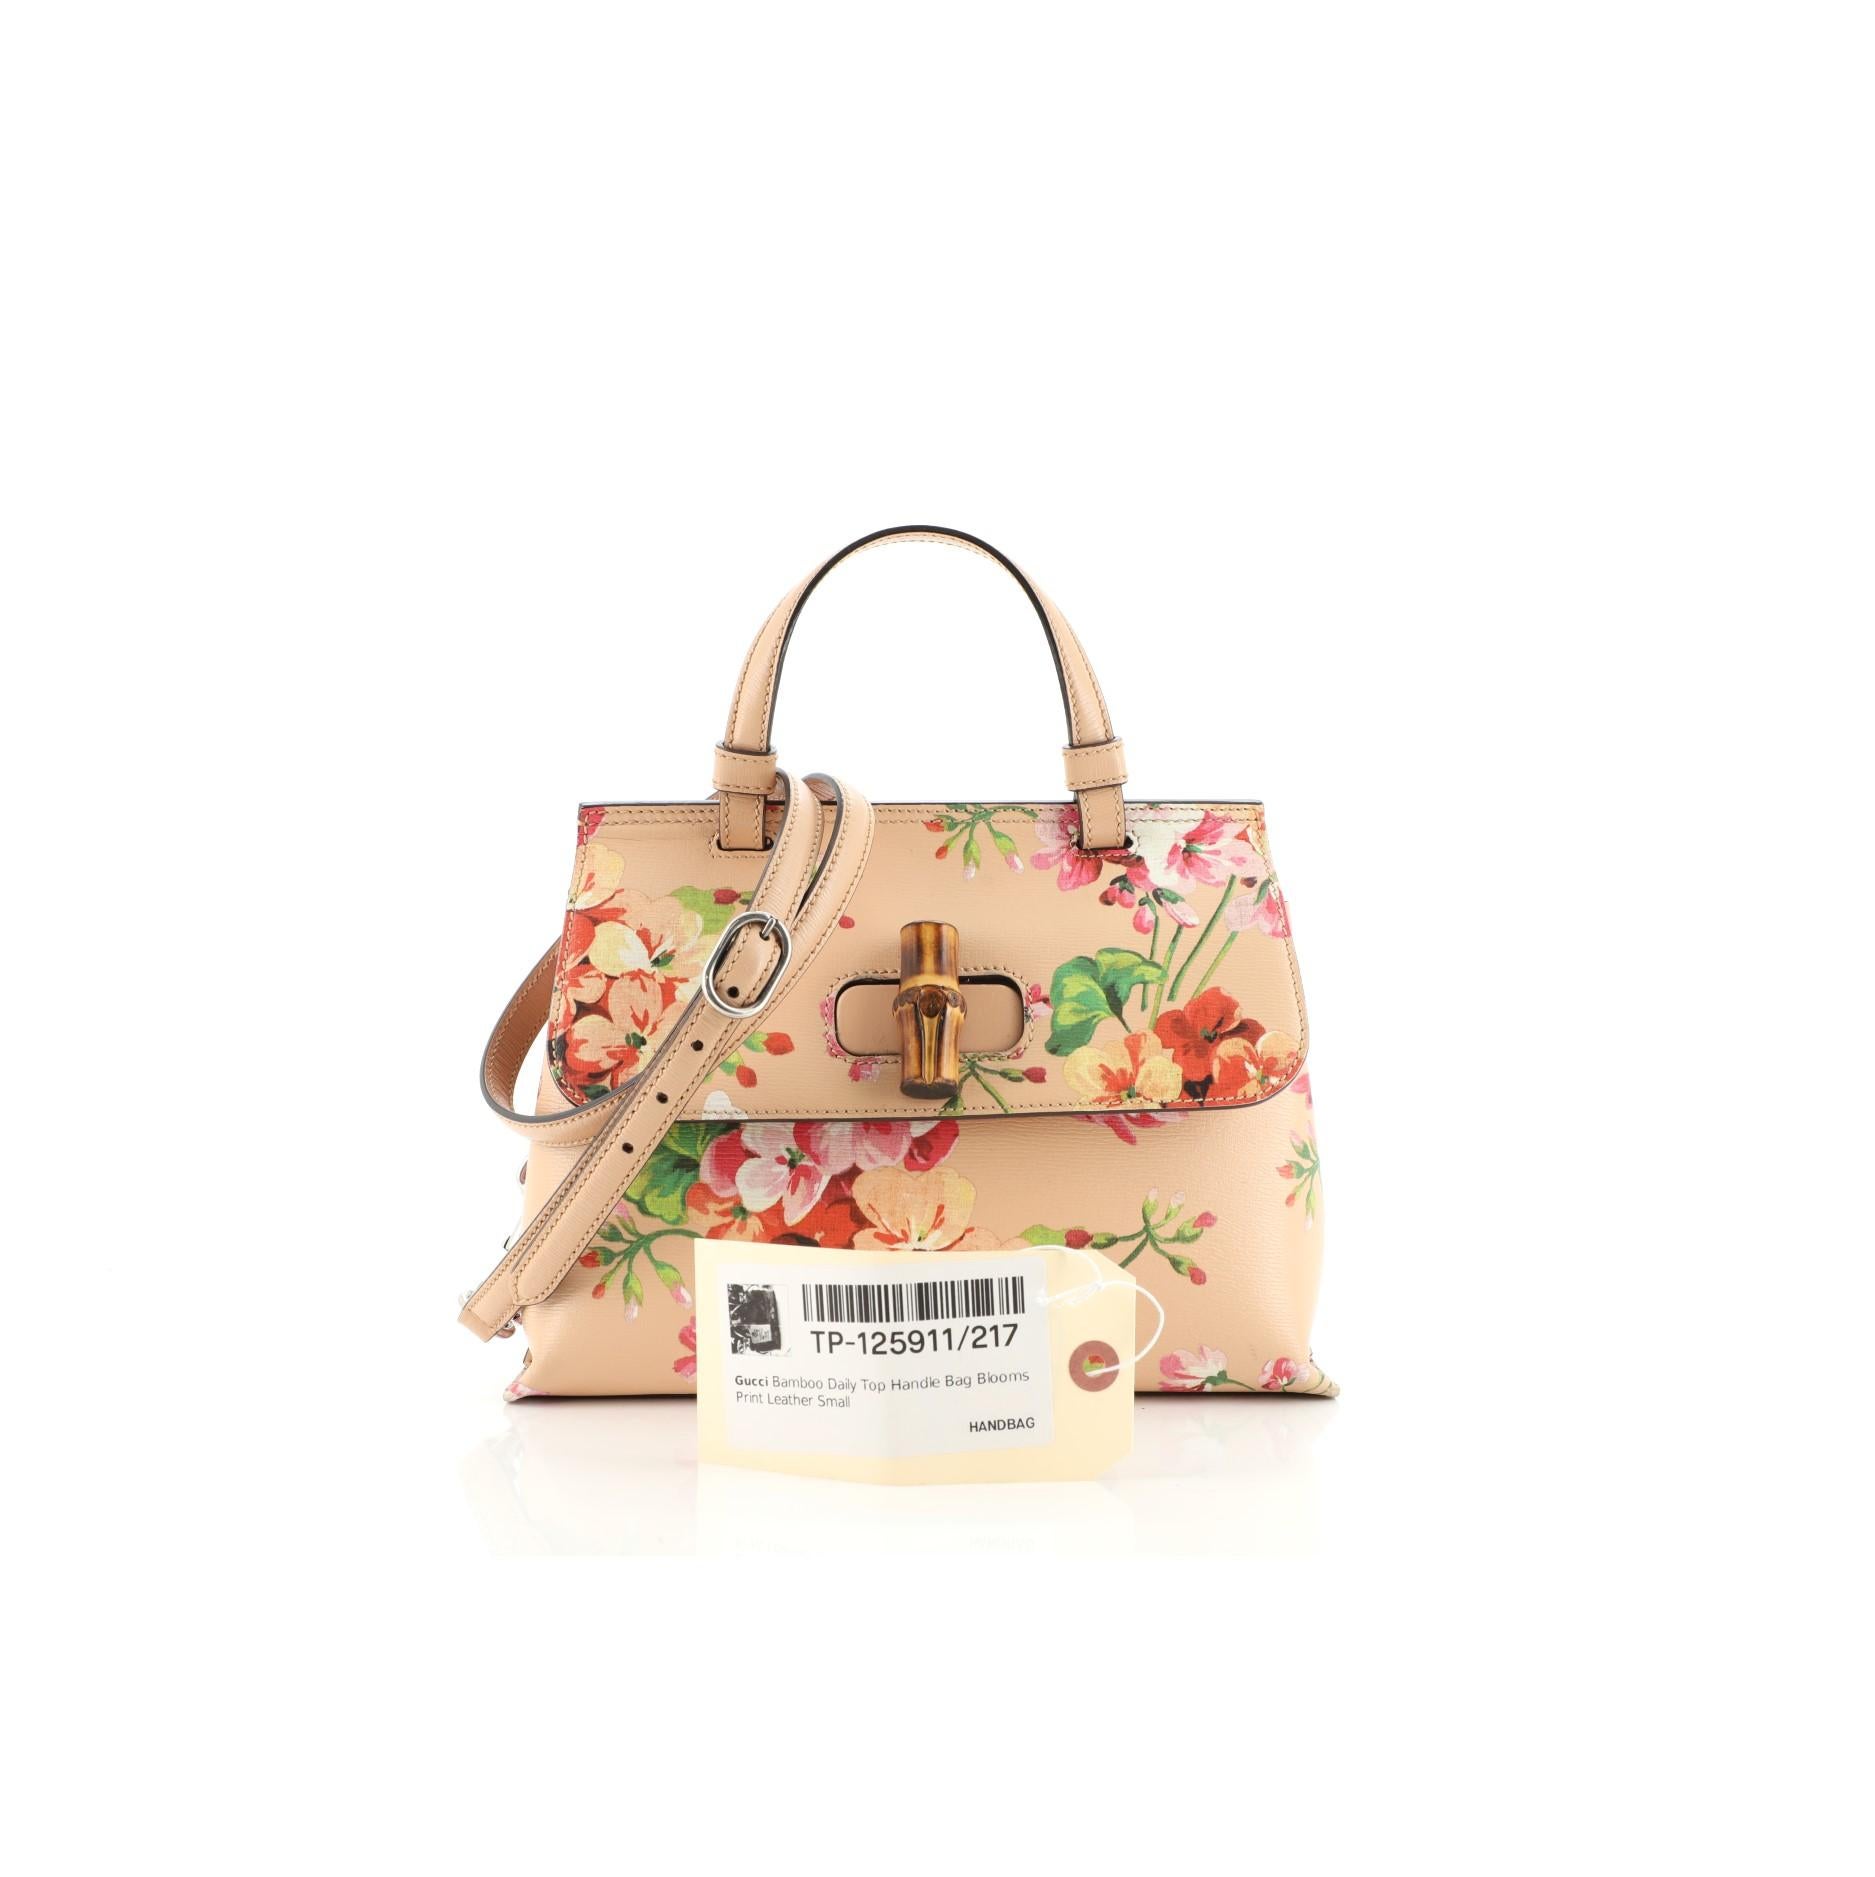 Beige Gucci Bamboo Daily Top Handle Bag Blooms Print Leather Small